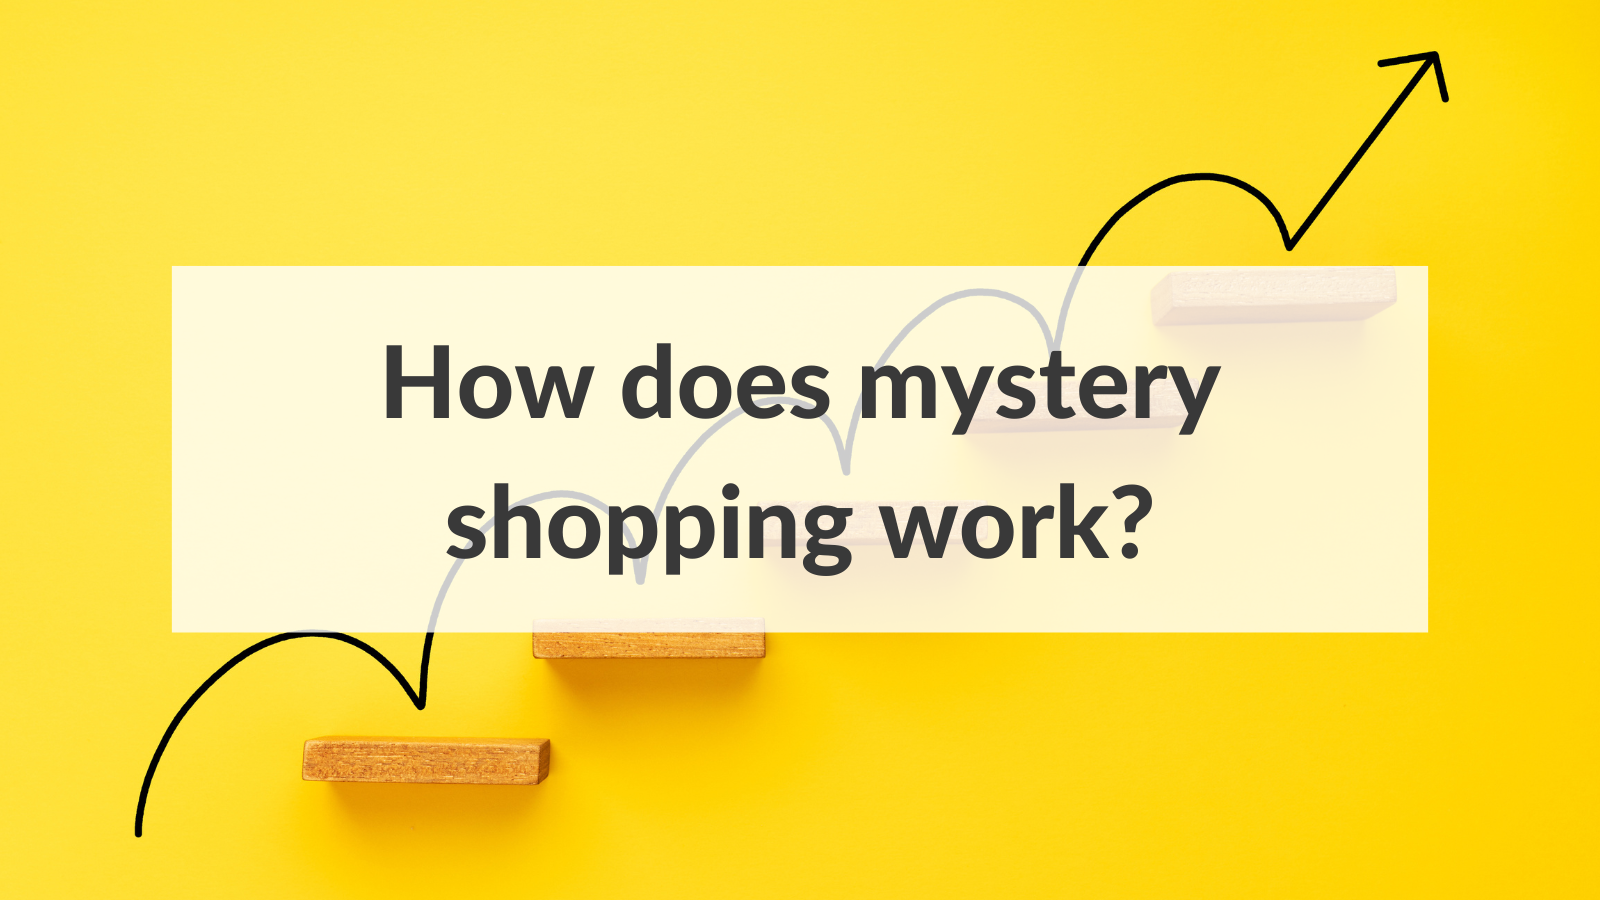 Decode the mystery shopping process in 5 steps